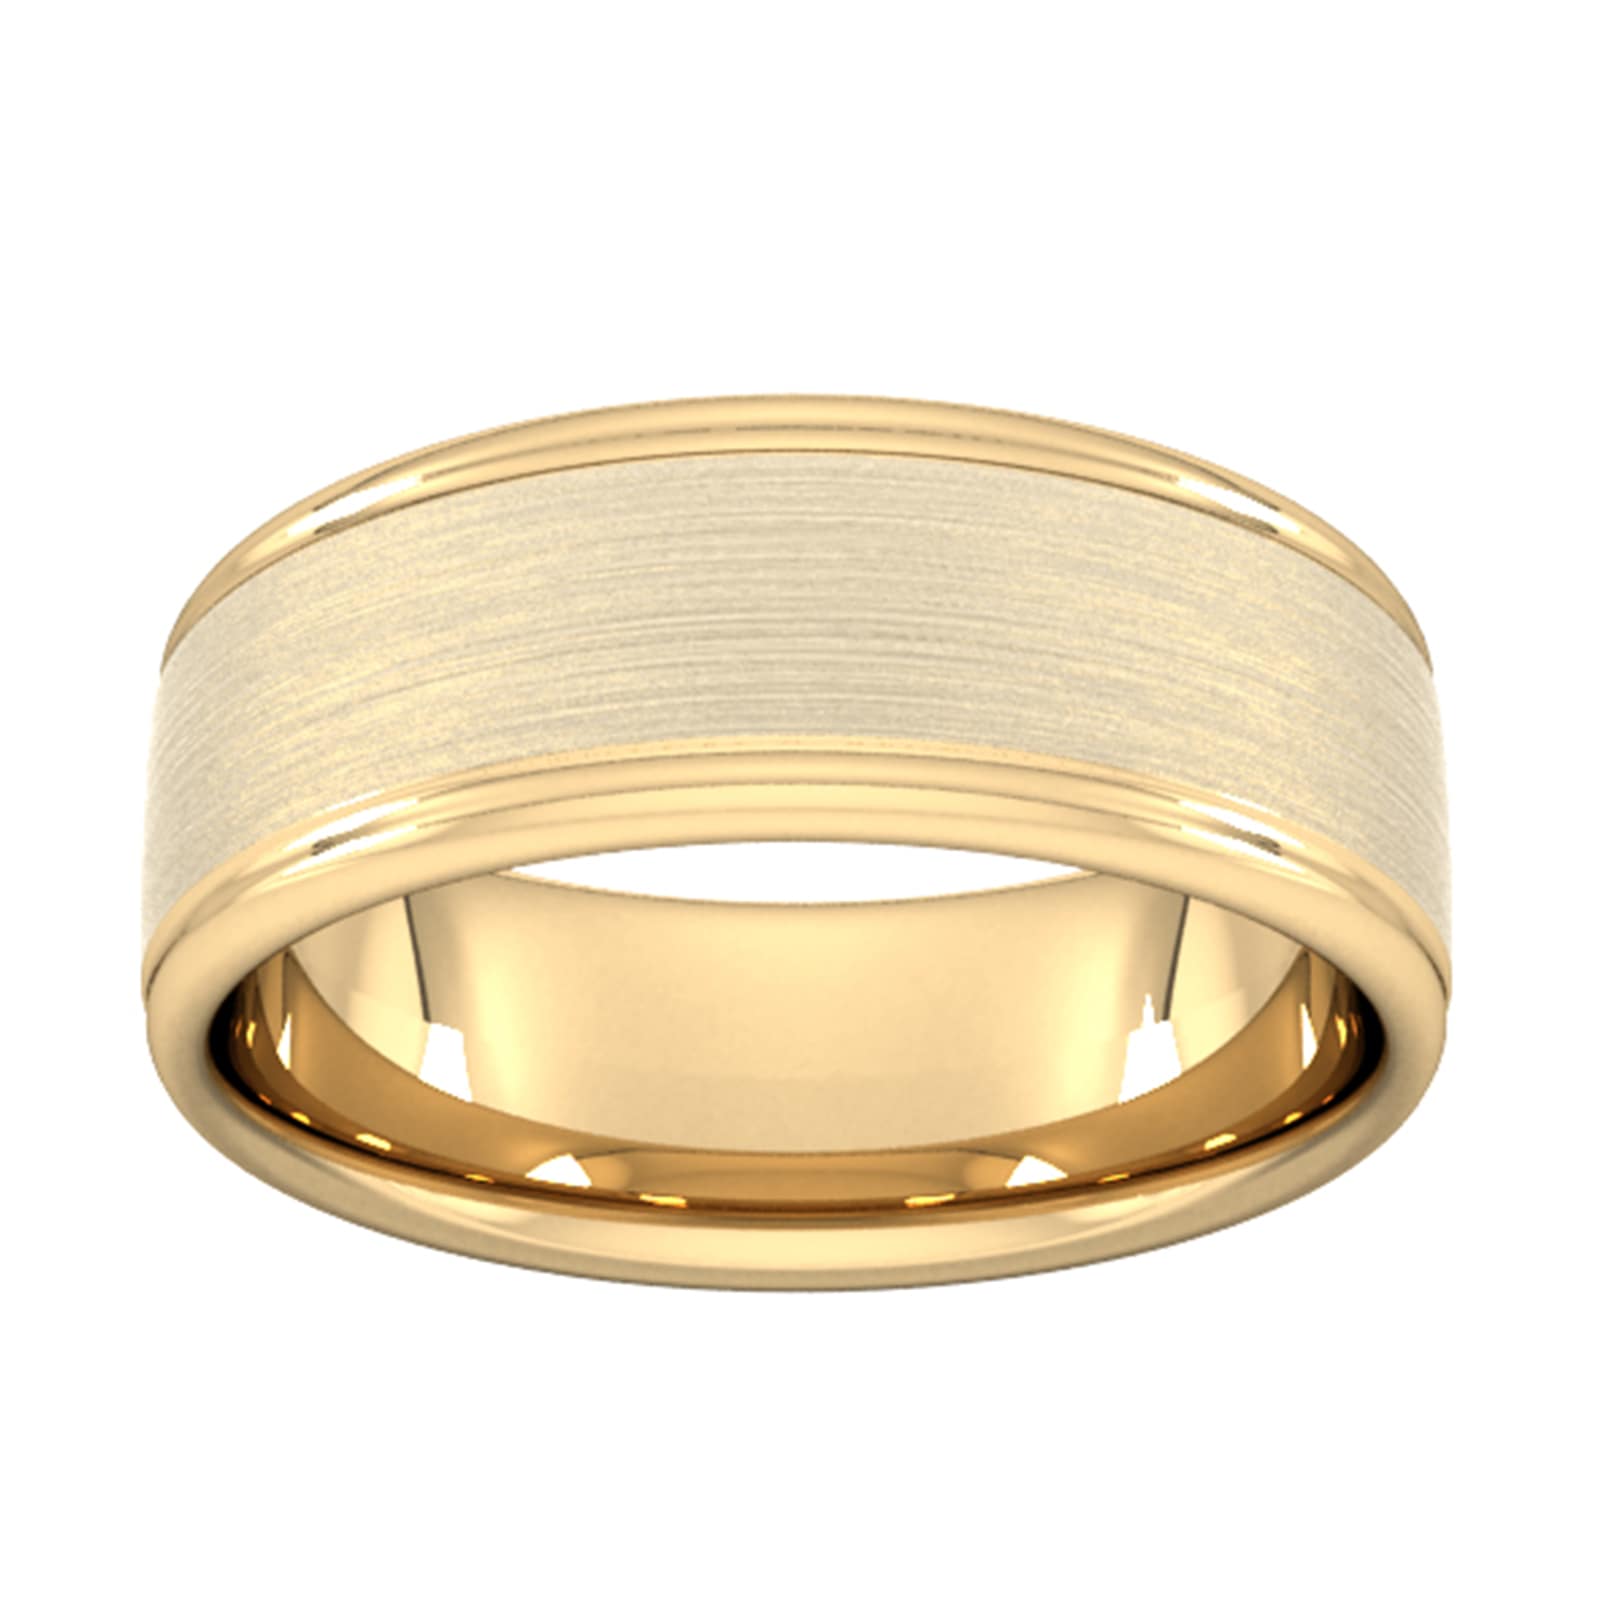 8mm Slight Court Extra Heavy Matt Centre With Grooves Wedding Ring In 18 Carat Yellow Gold - Ring Size O